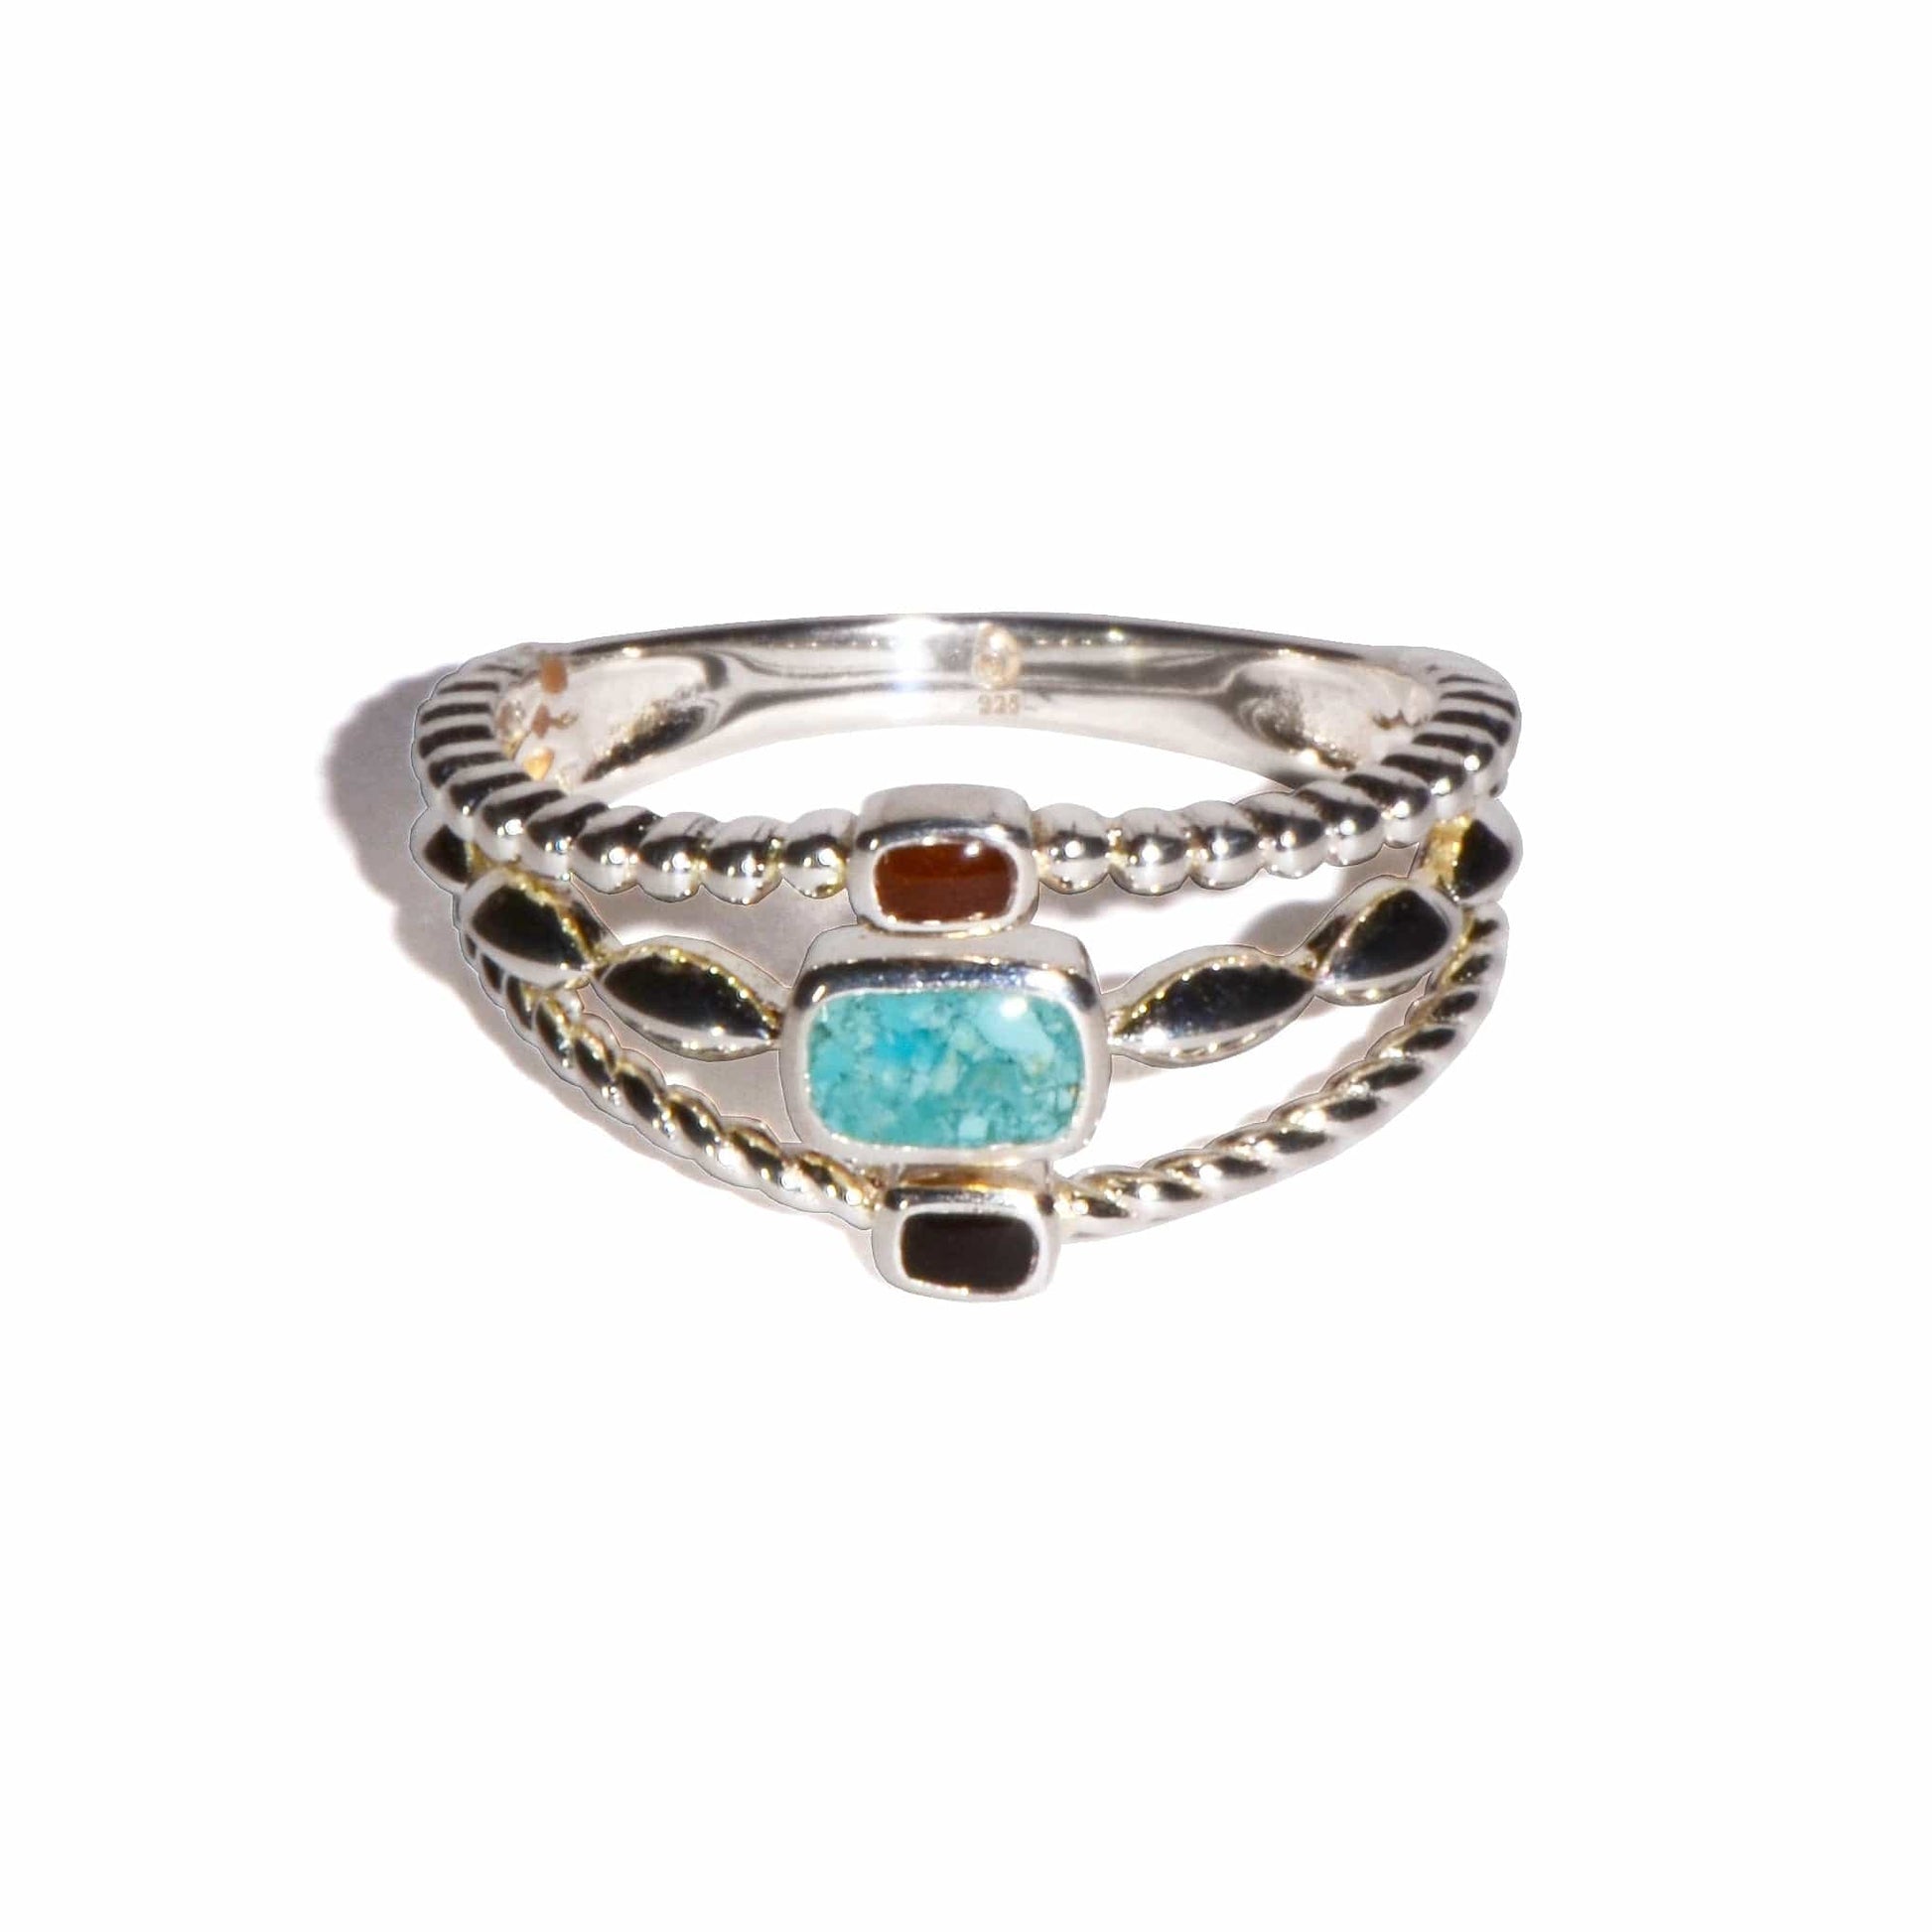 Boho Stack Ring - Turquoise/Bell Rock/Cathedral Rock Charged Ring